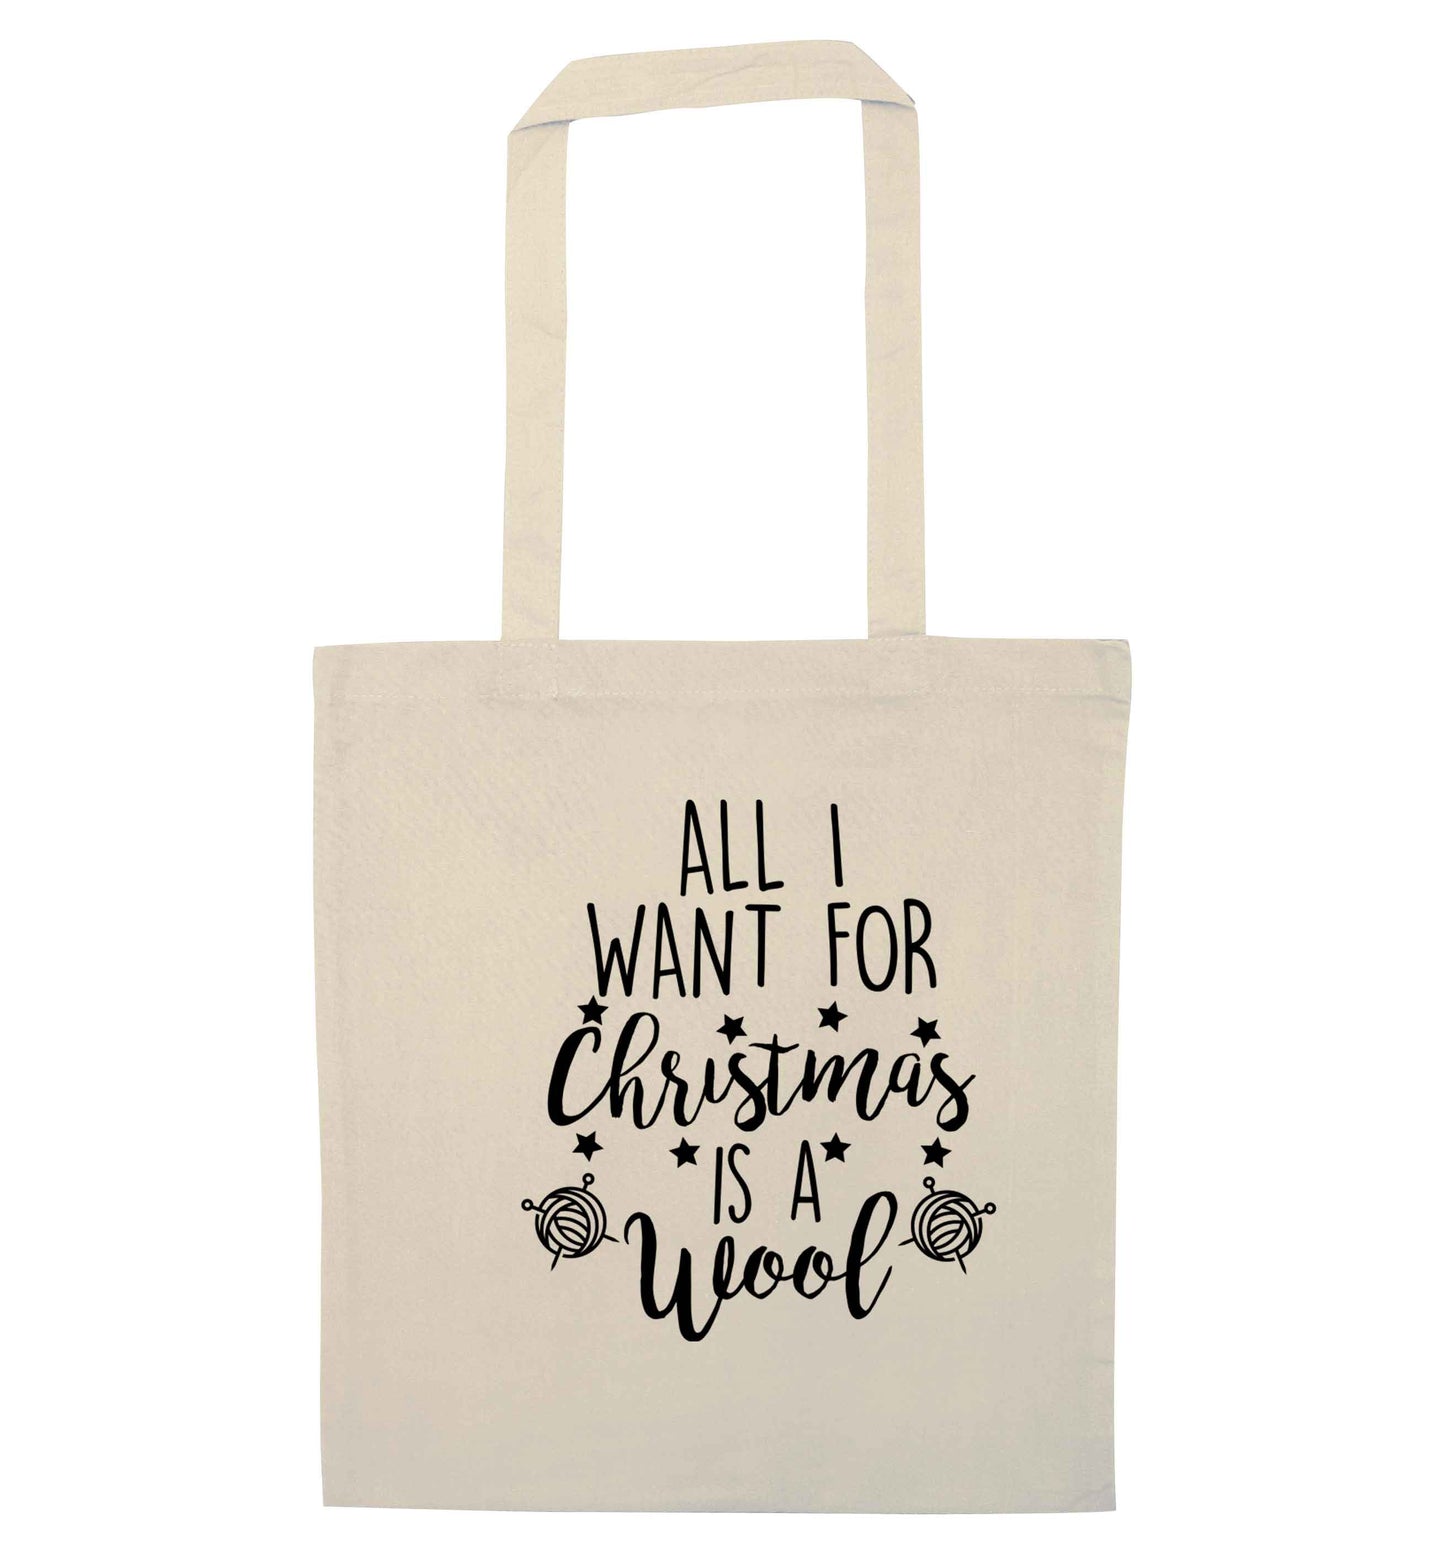 All I want for Christmas is wool! natural tote bag